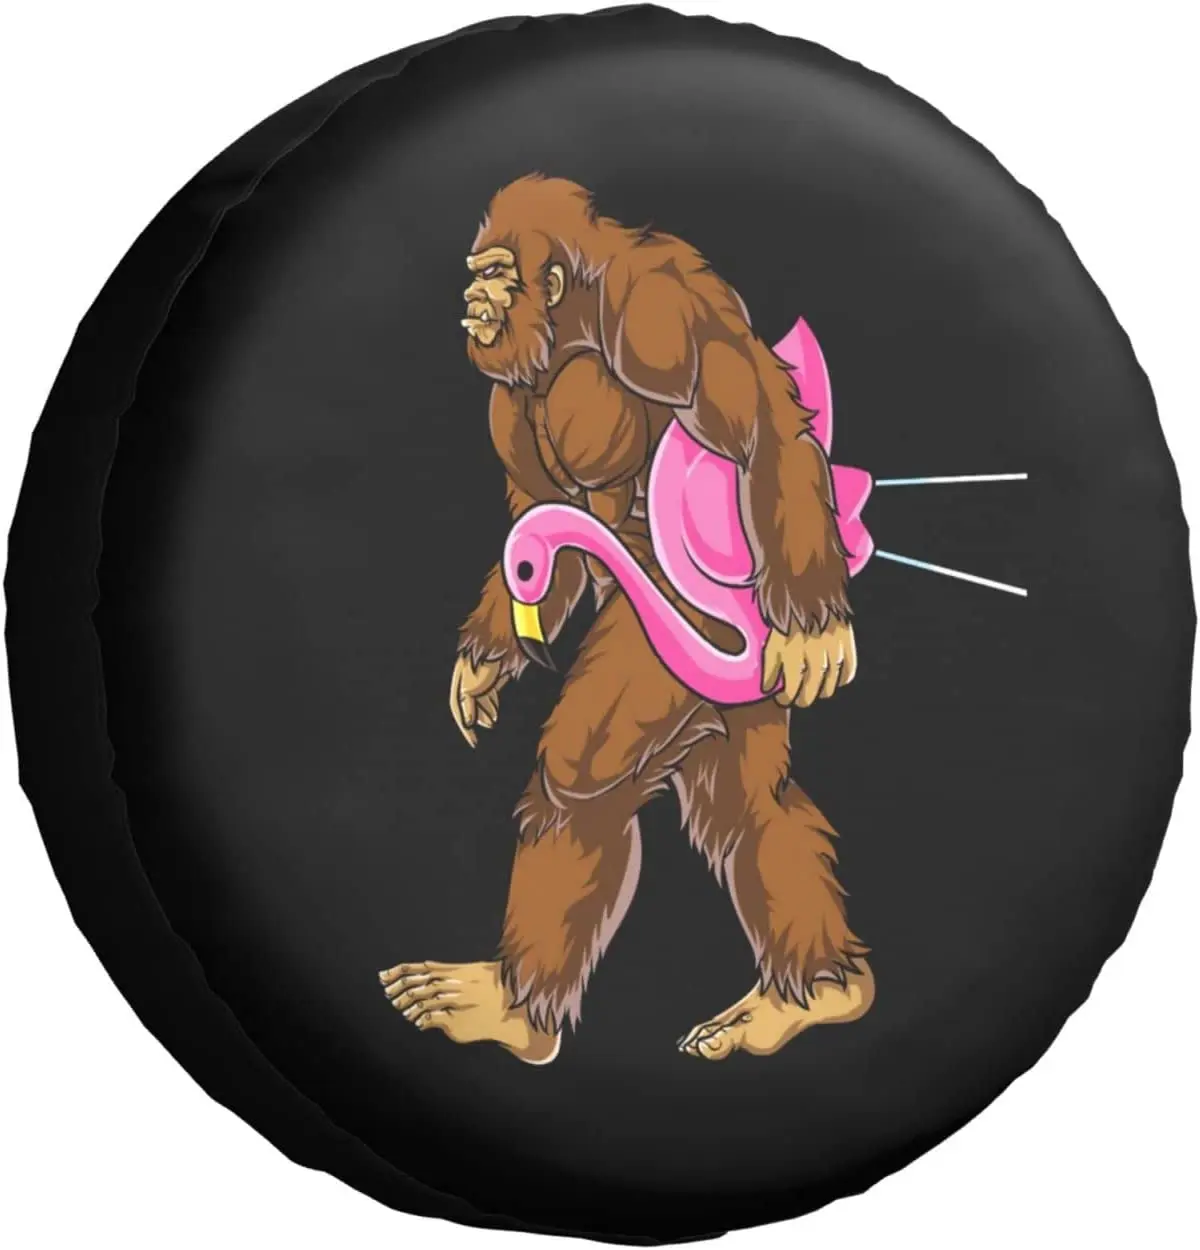 

Bigfoot Carrying Lawn Flamingo Spare Tire Cover - Waterproof Universal Spare Wheel Tire Cover - for Trailer, Camper, SUV